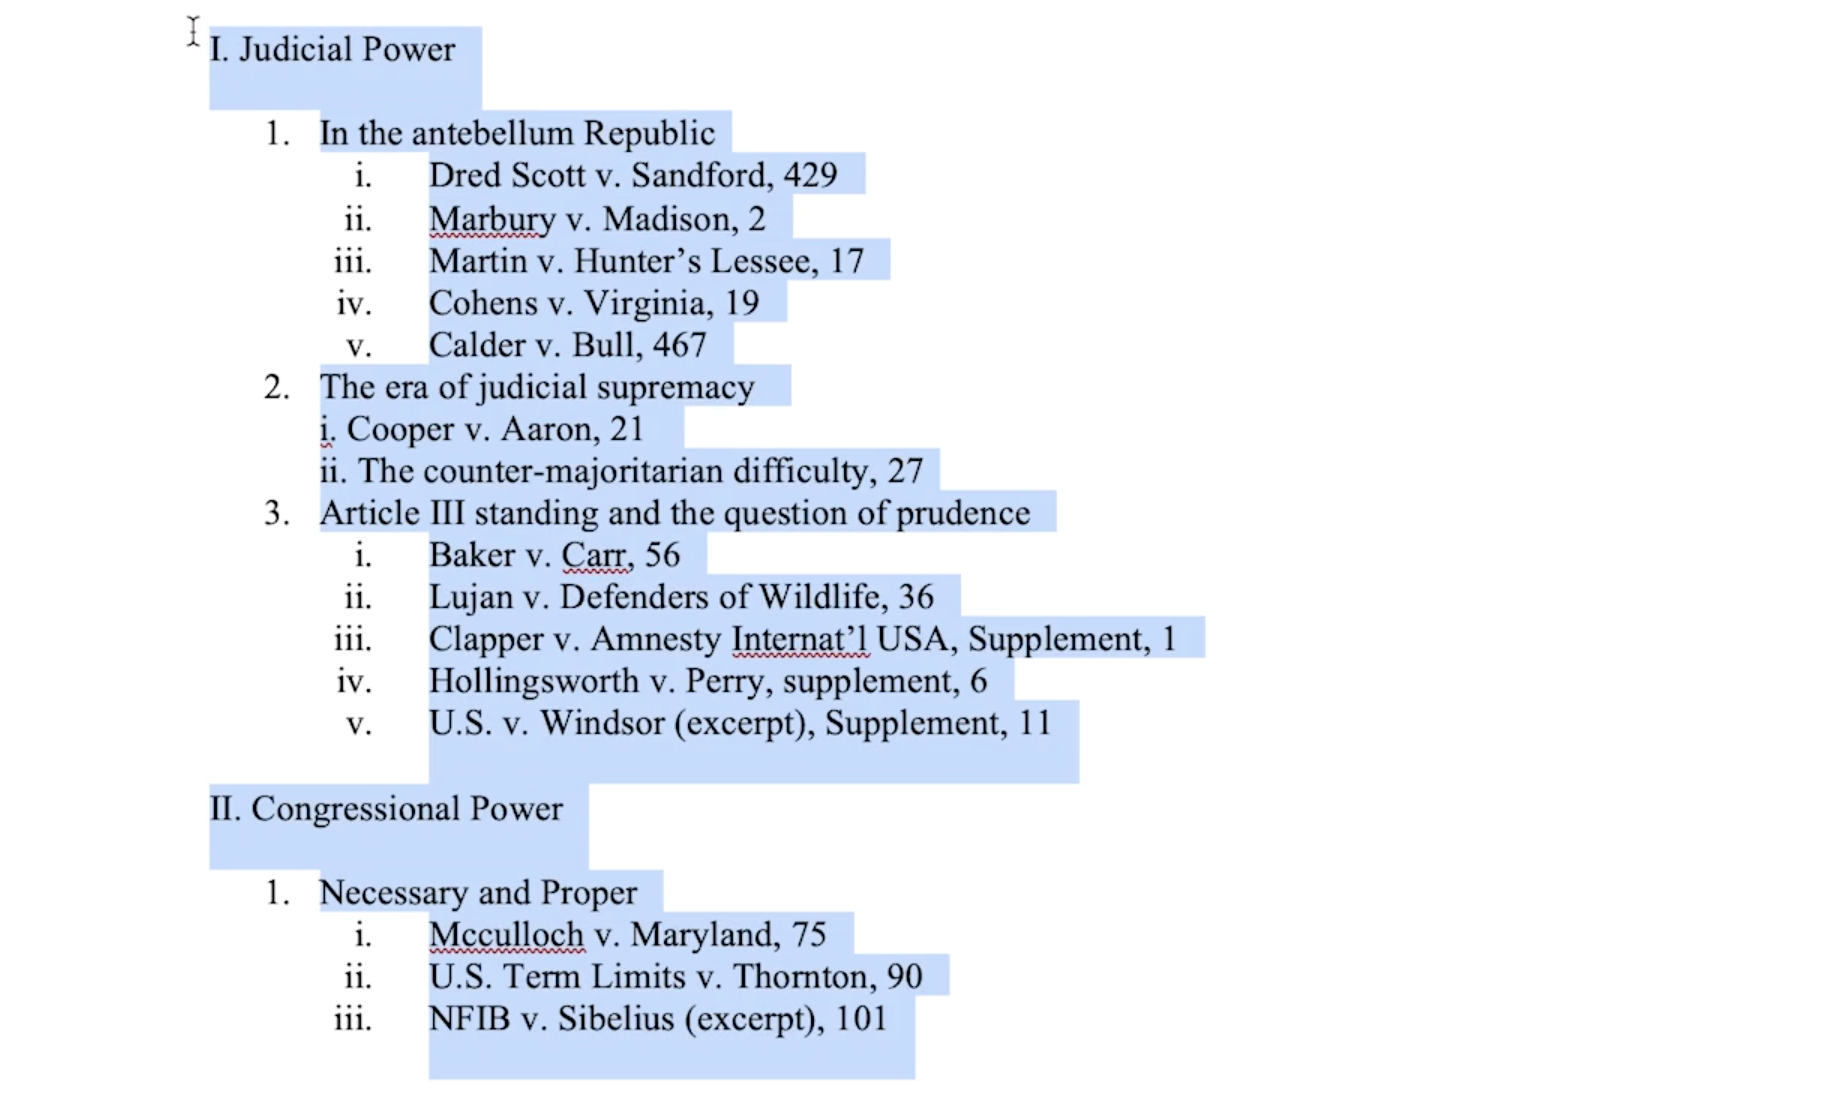 Selected table of contents shown in constitutional law casebook.